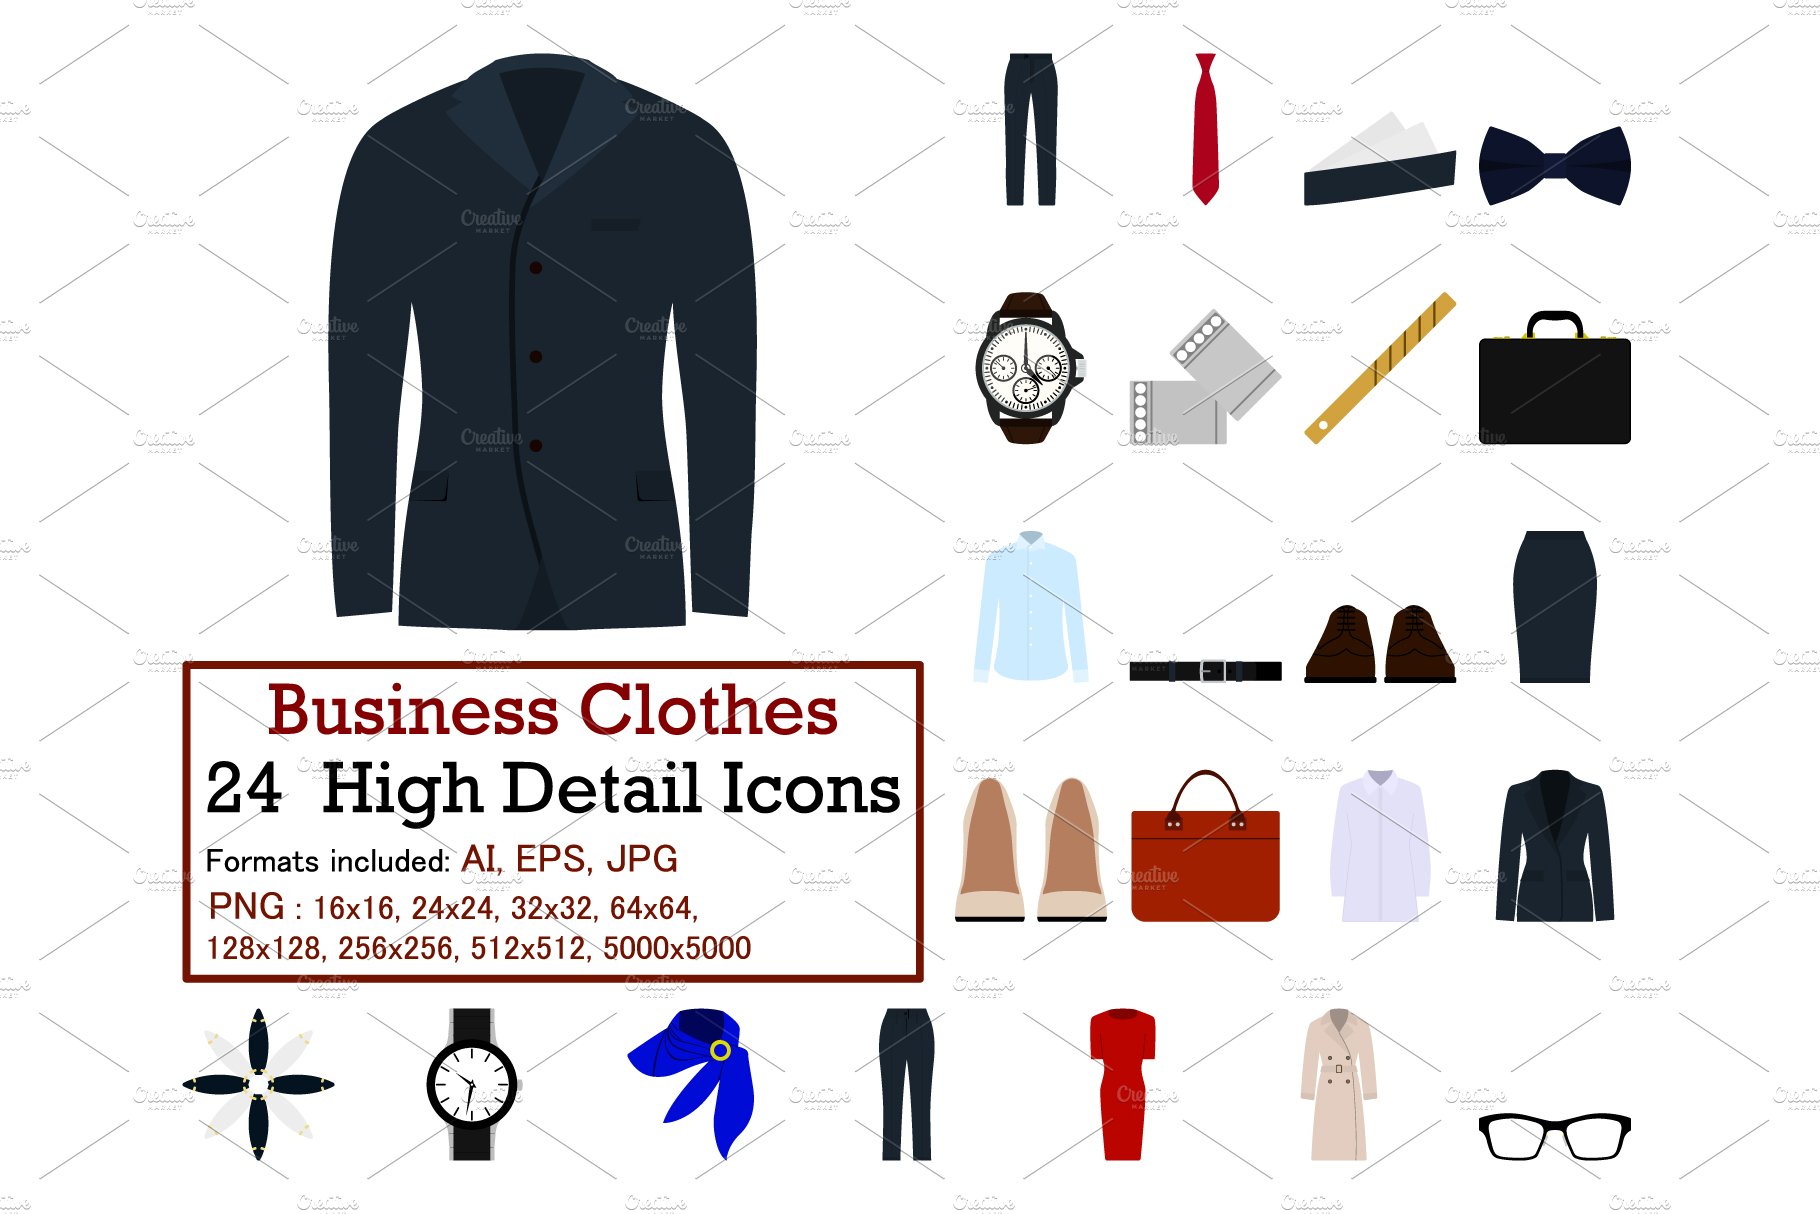 Business Clothes Icon Set cover image.